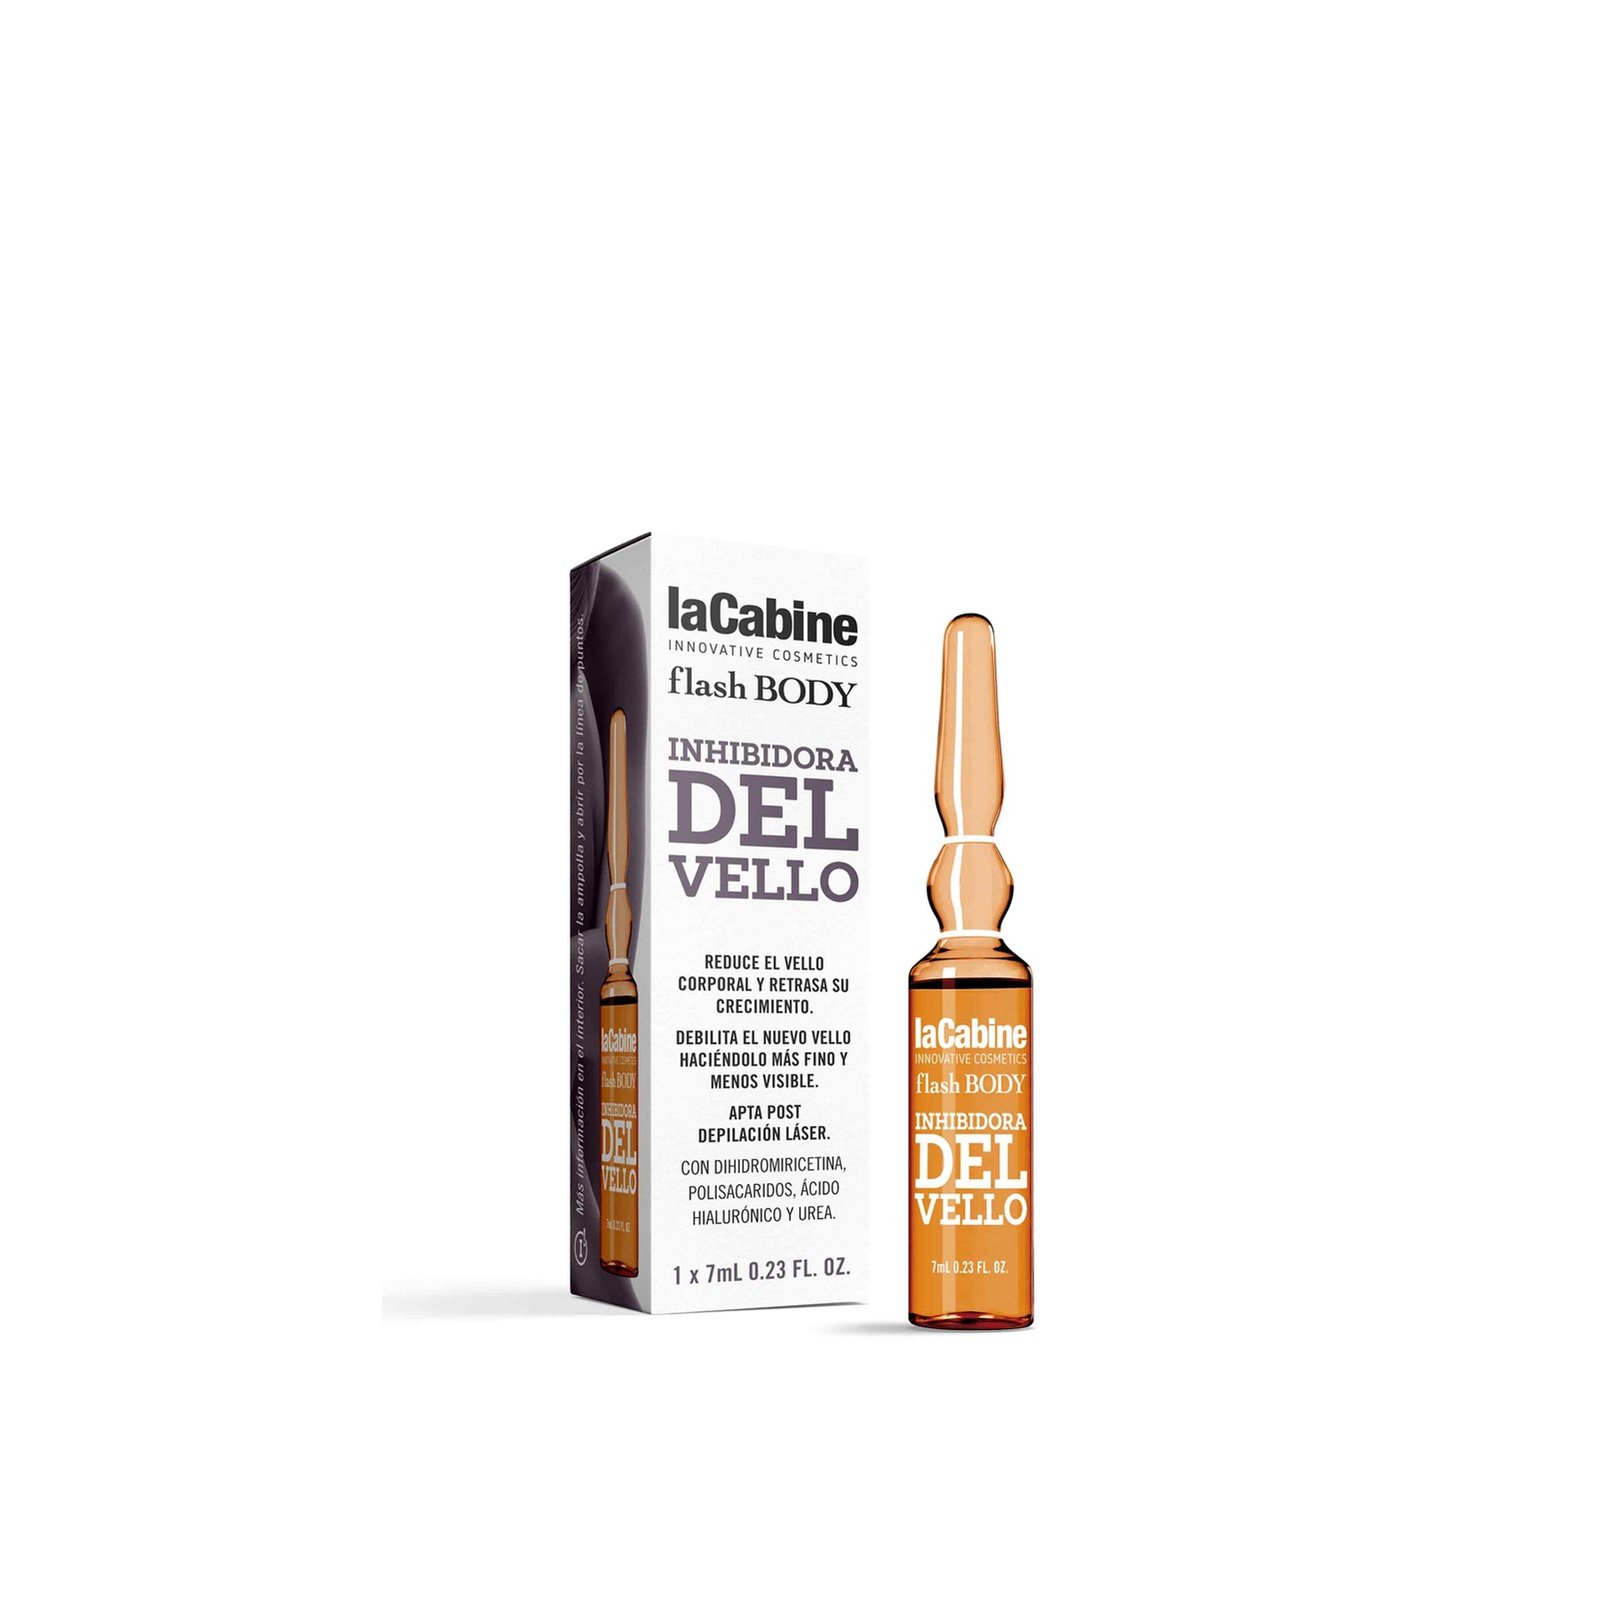 La Cabine Flash Body Hair Inhibitor Concentrated Ampoule 1x7ml